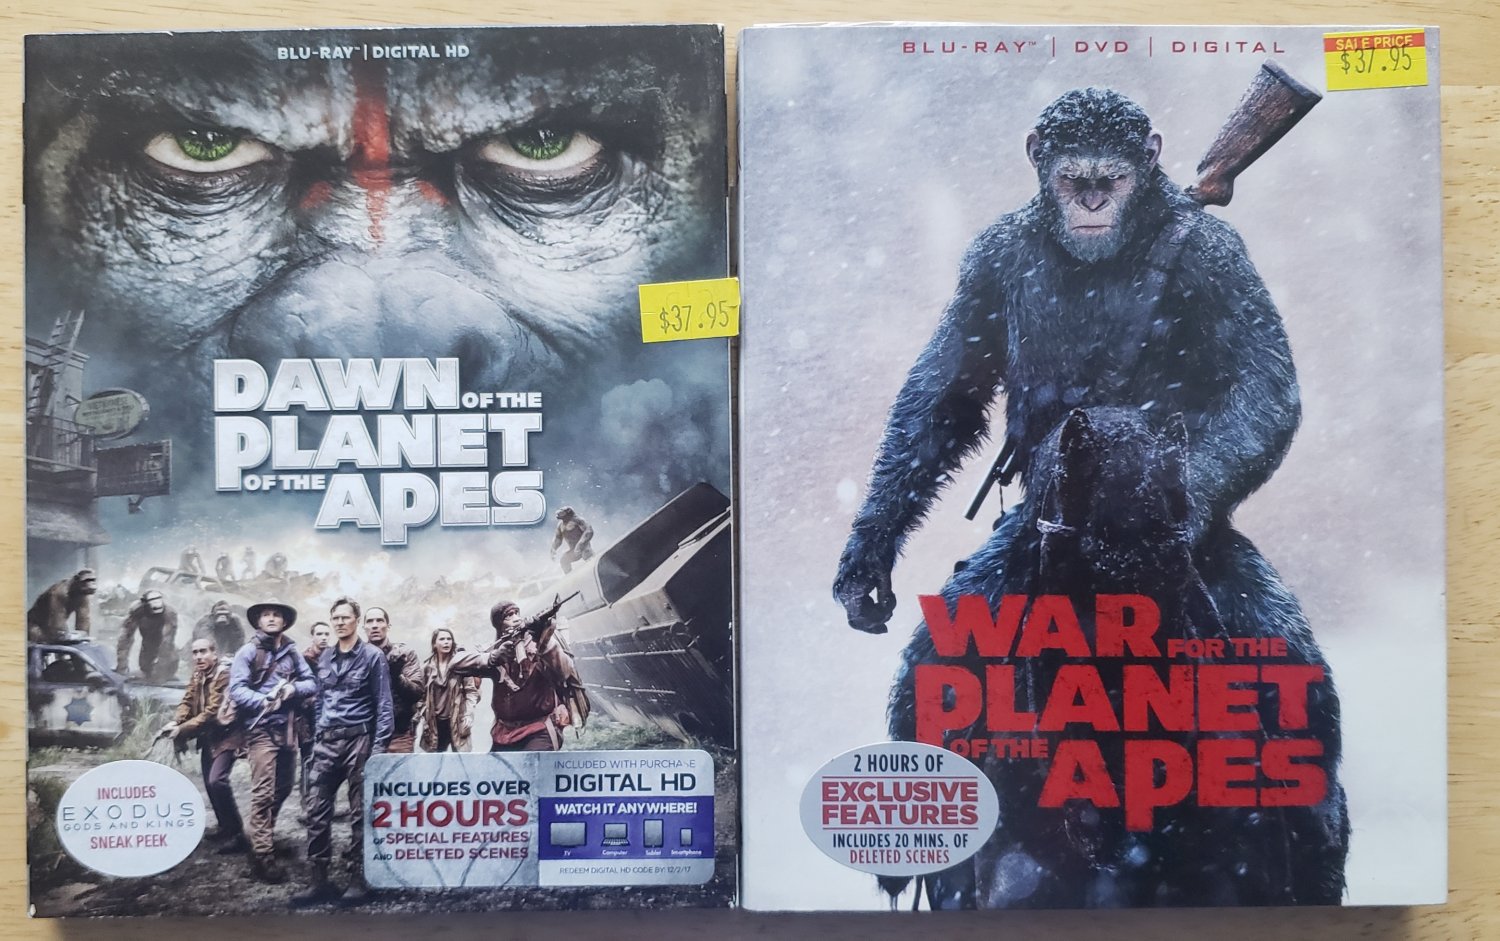 LOT OF 2 DAWN OF THE PLANET OF THE APES & WAR OF THE PLANET OF THE APES BLU-RAYs